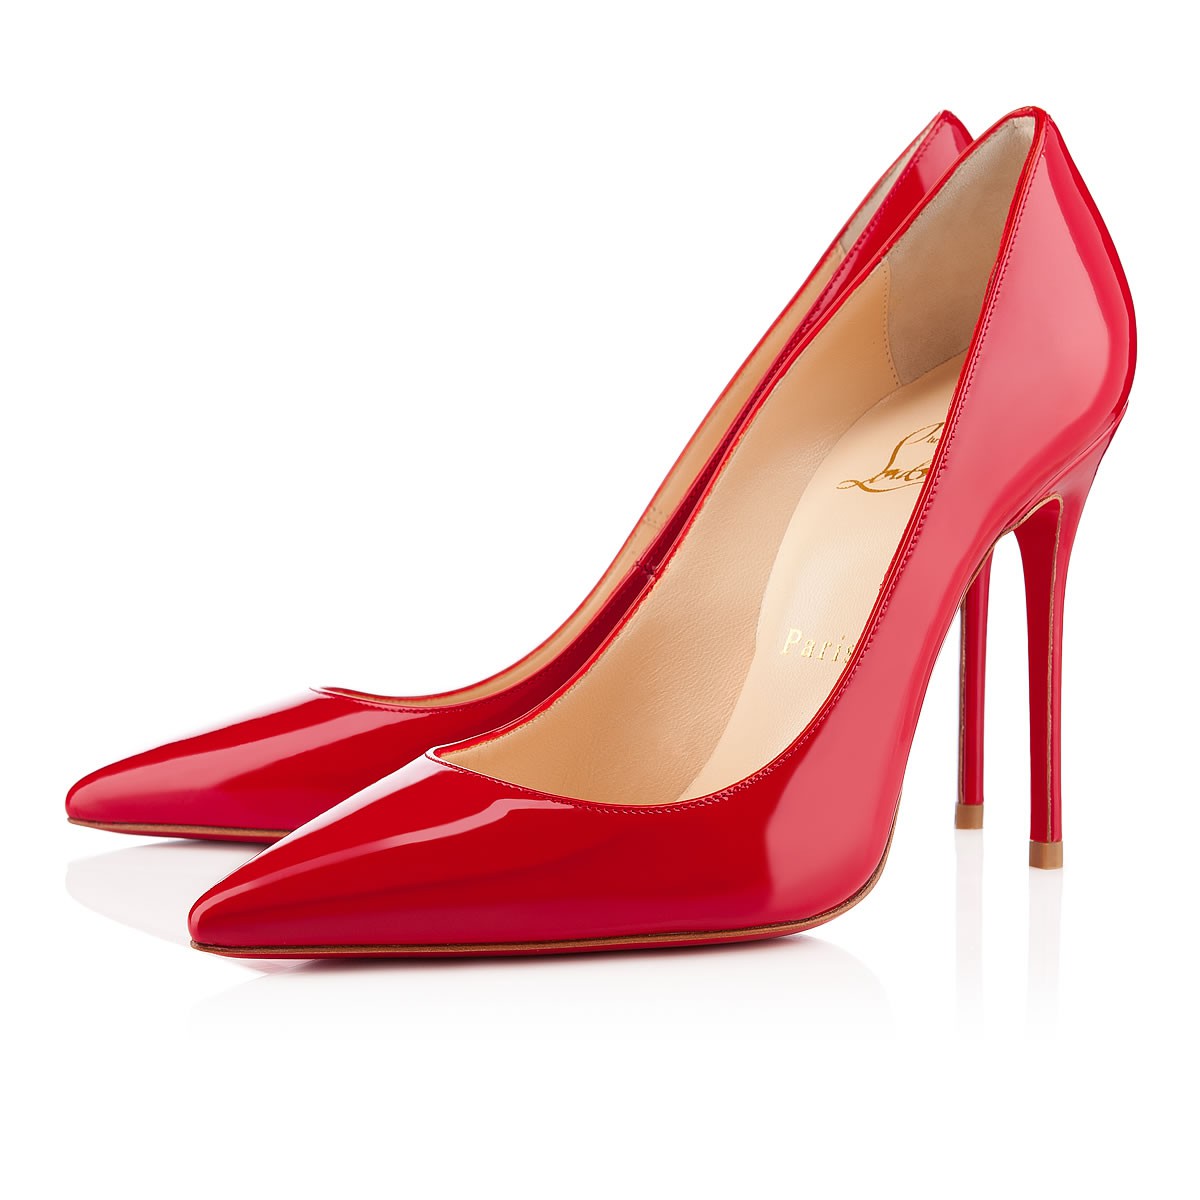 Christian Louboutin Decollete 554 100mm Pumps Red